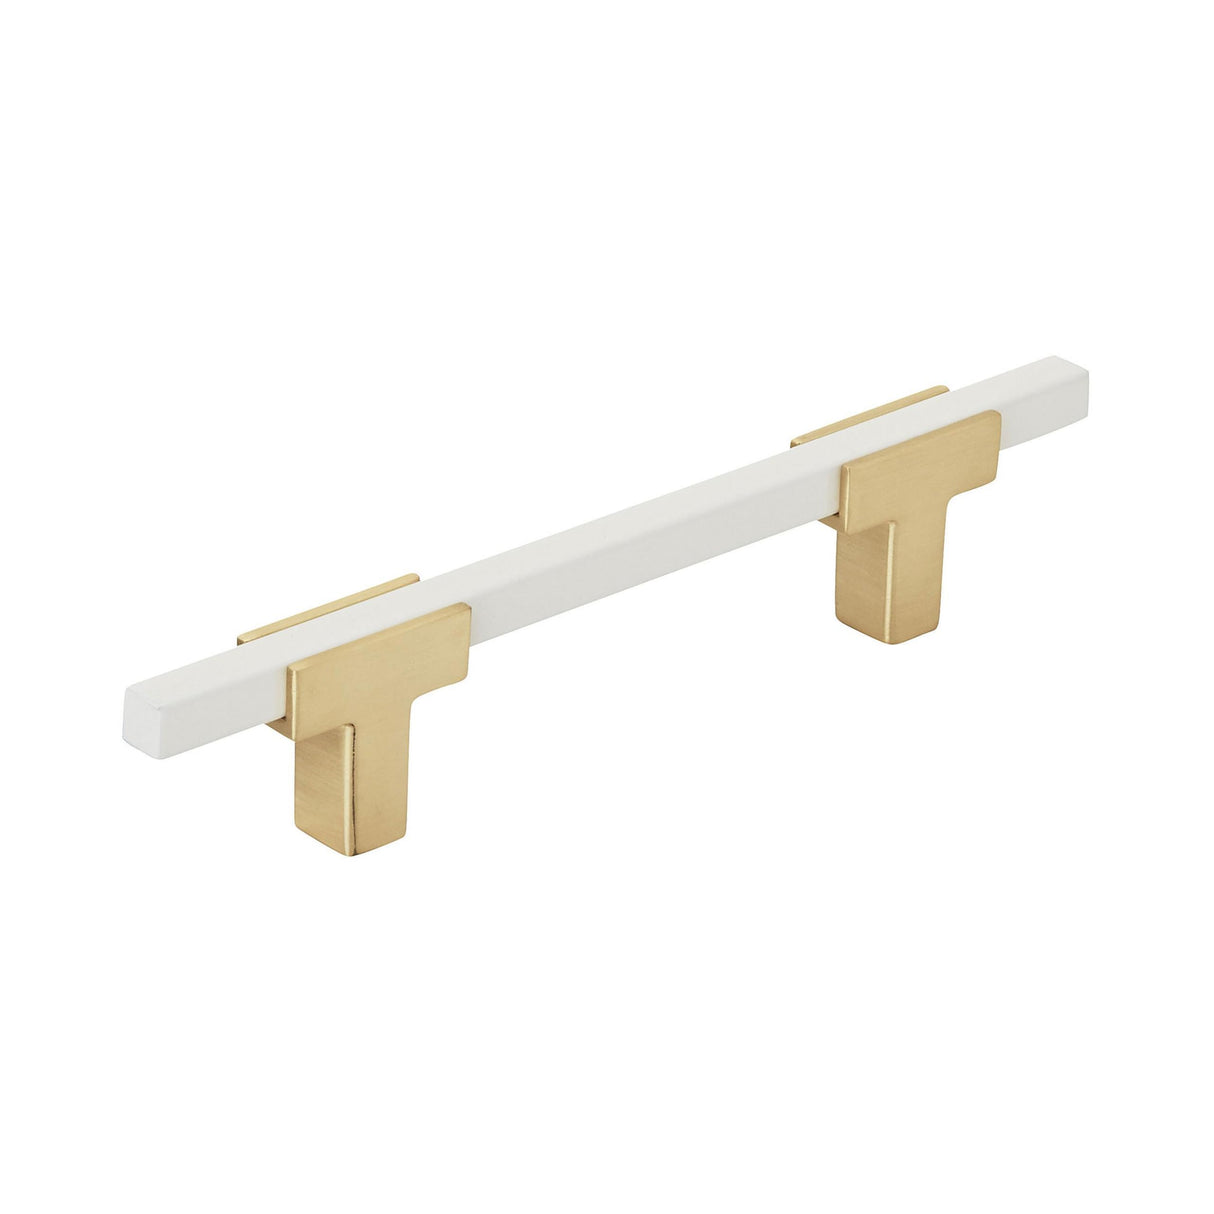 Amerock Cabinet Pull Brushed Gold/White 3-3/4 inch (96 mm) Center to Center Urbanite 1 Pack Drawer Pull Drawer Handle Cabinet Hardware